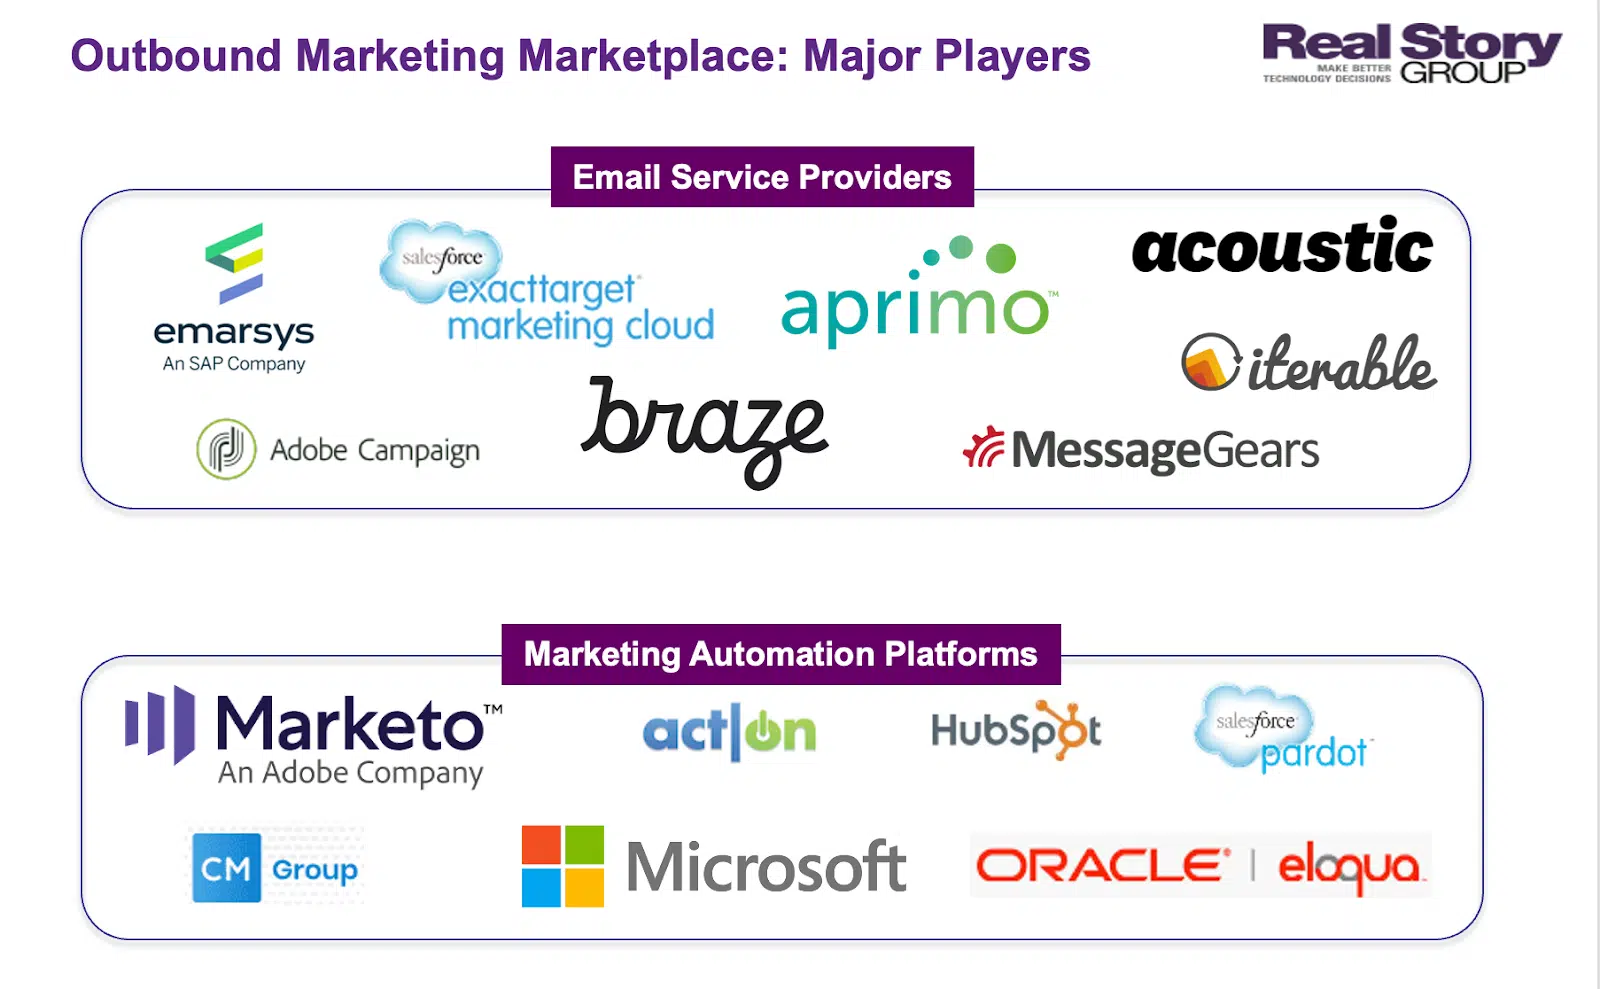 Outbound marketing marketplace